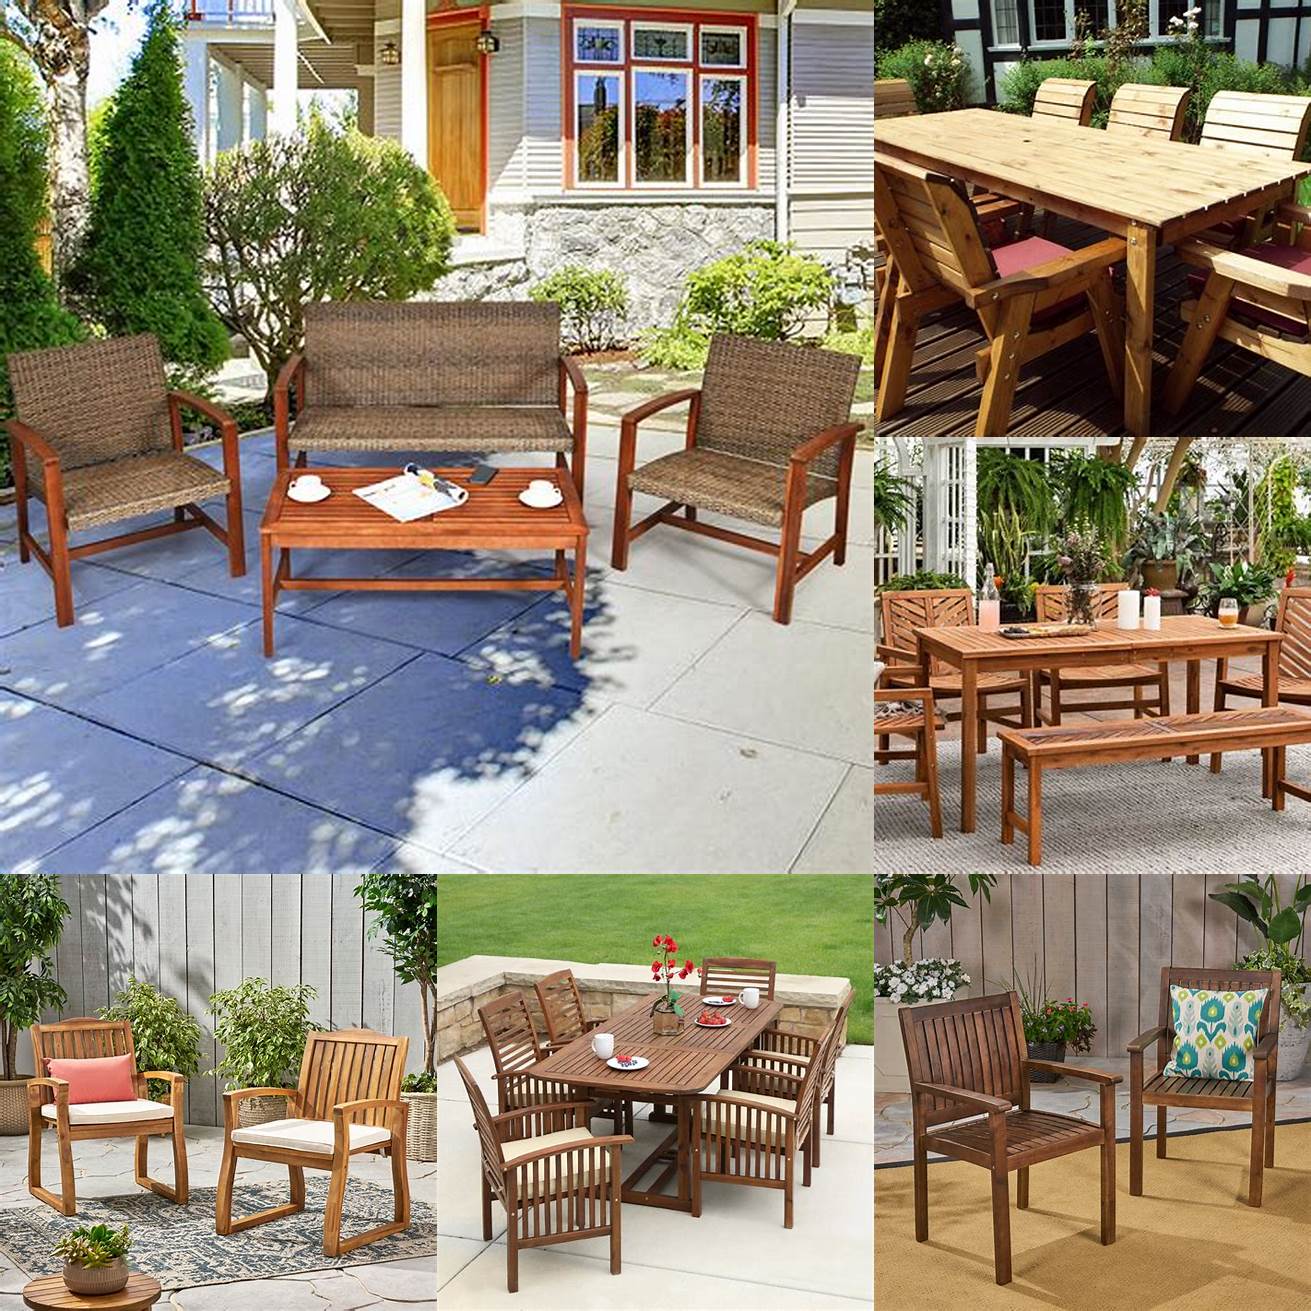 Wooden Patio Furniture